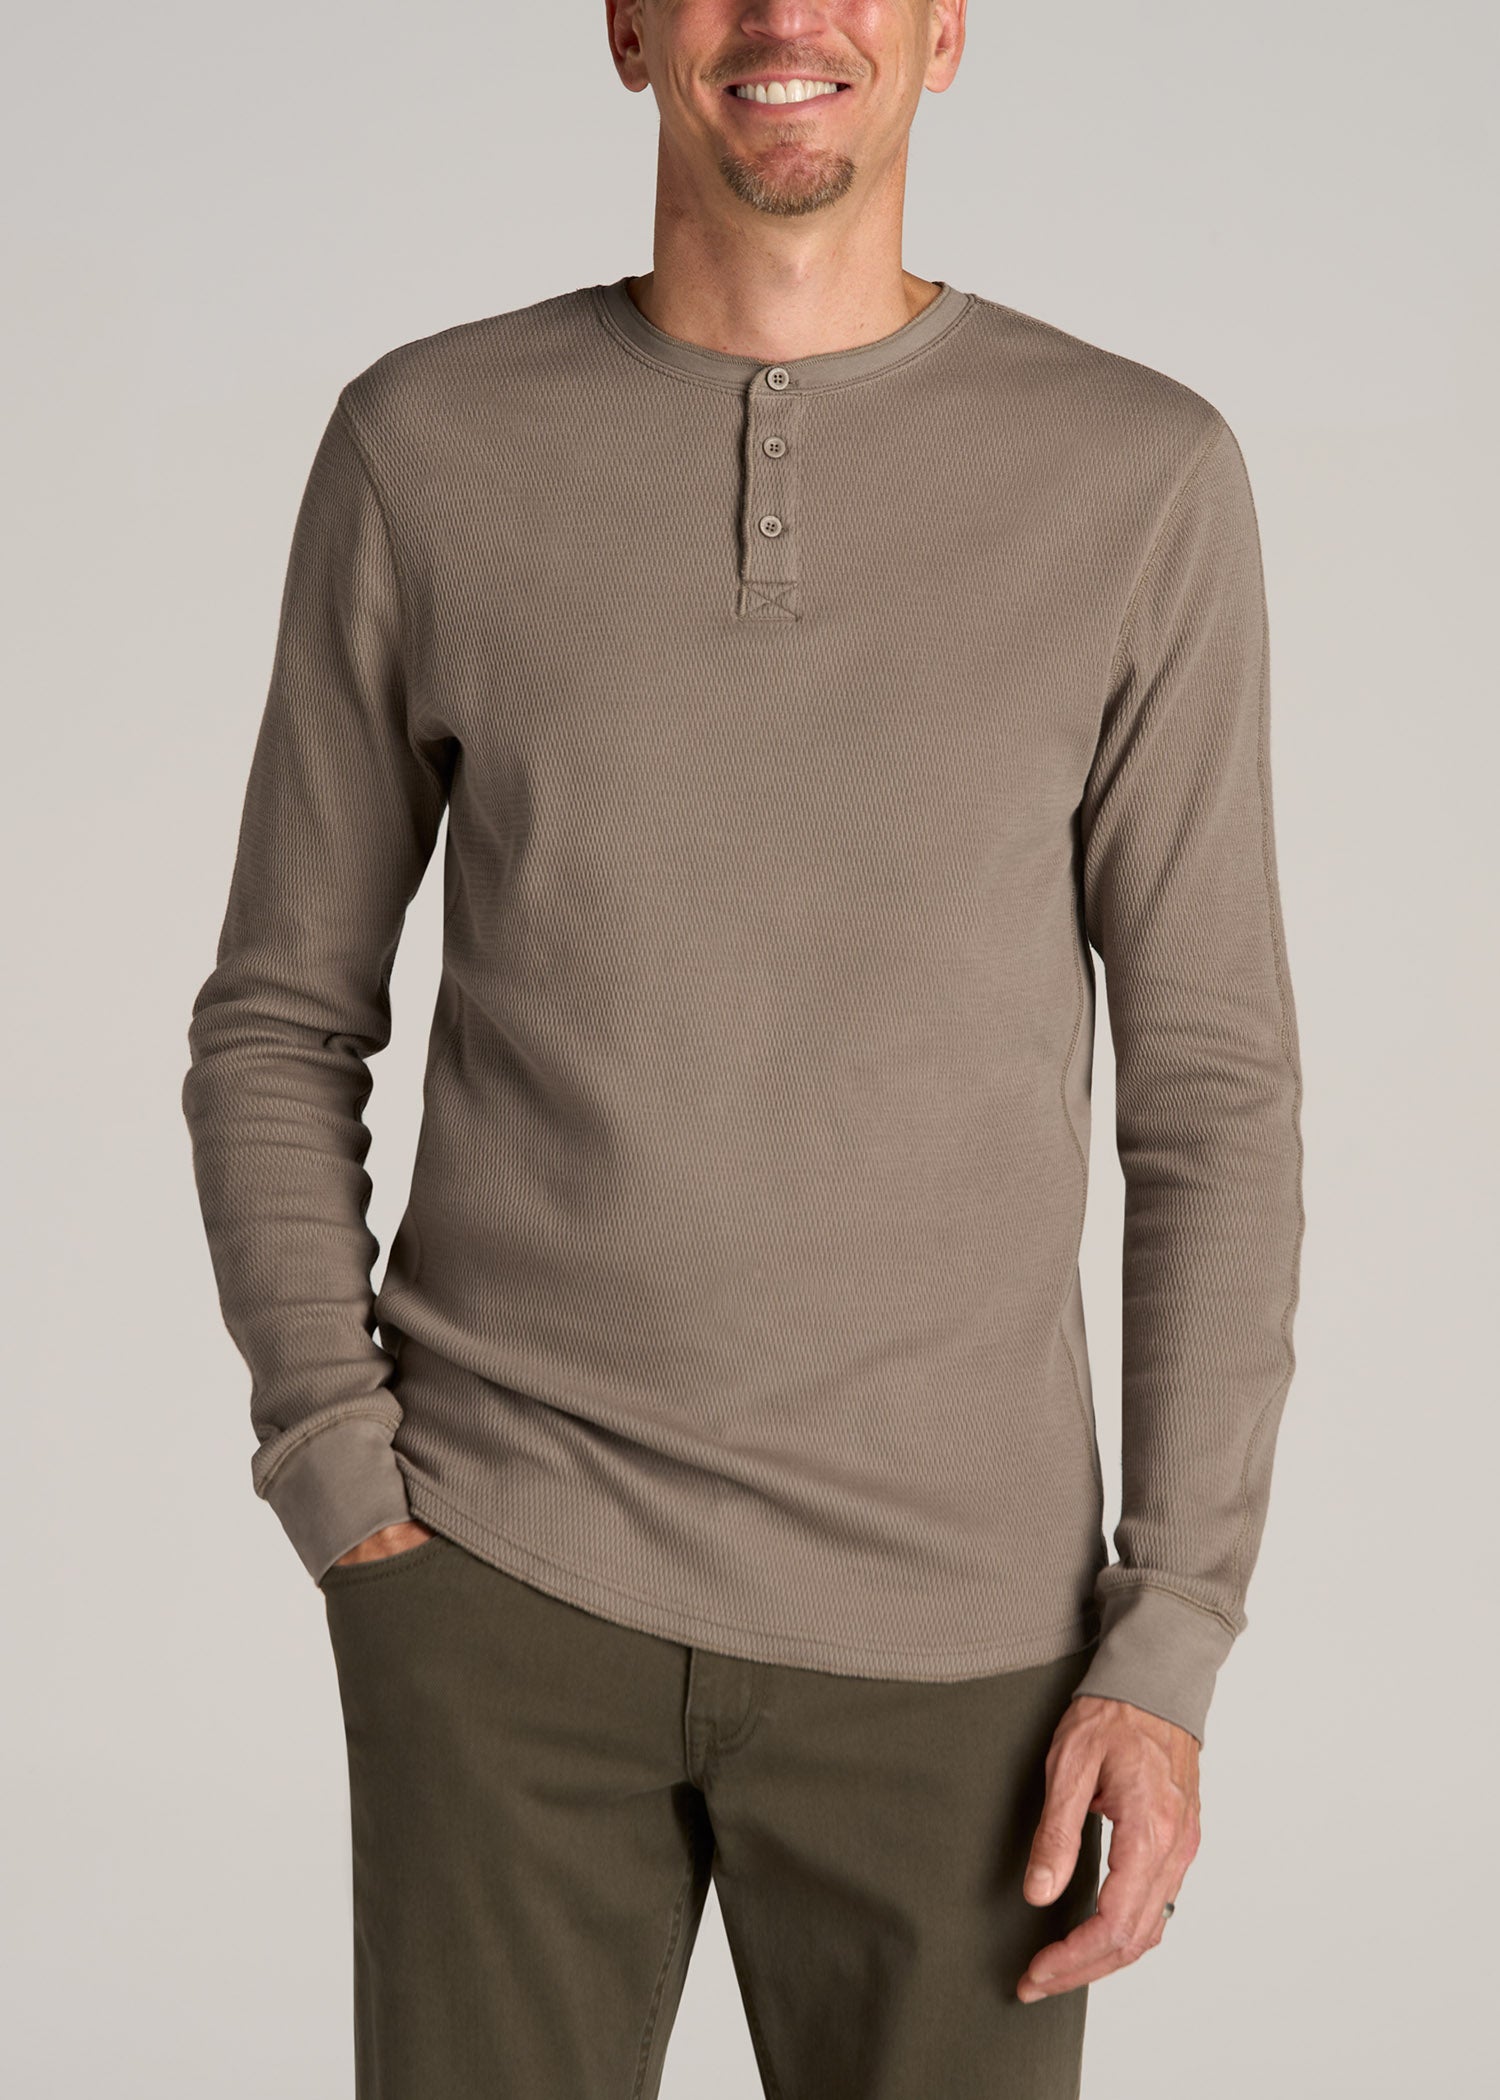 And Now This BRIGHT WHITE Men's Long-Sleeve Henley T-Shirt, US XXL